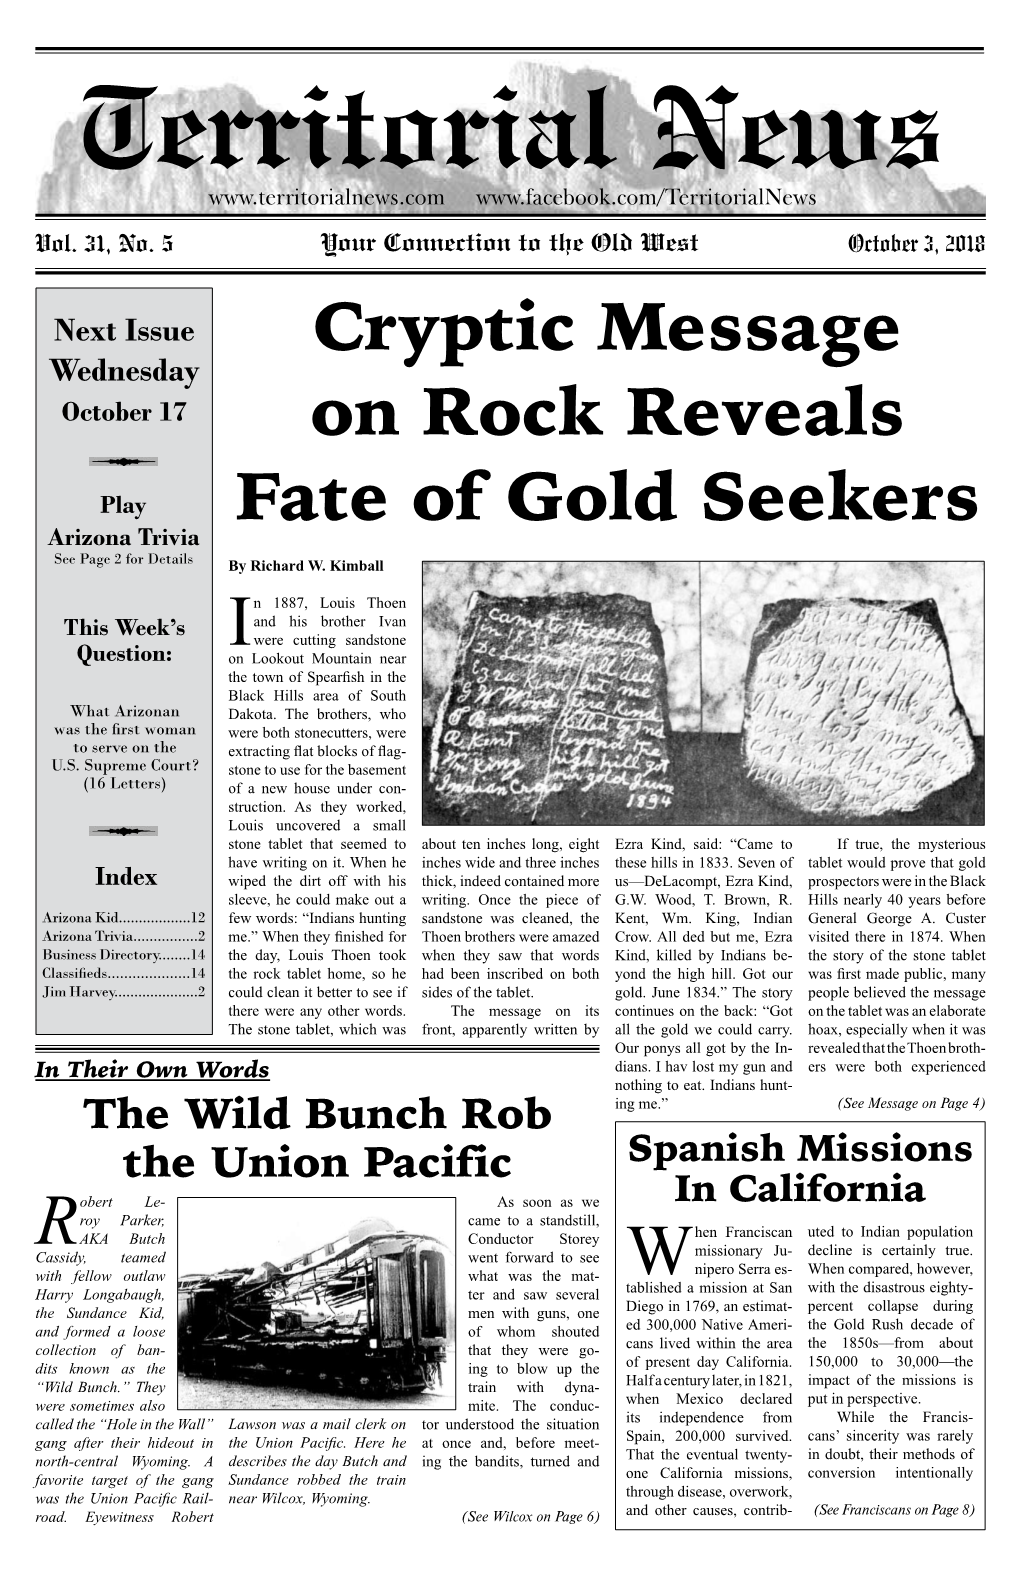 Cryptic Message on Rock Reveals Fate of Gold Seekers